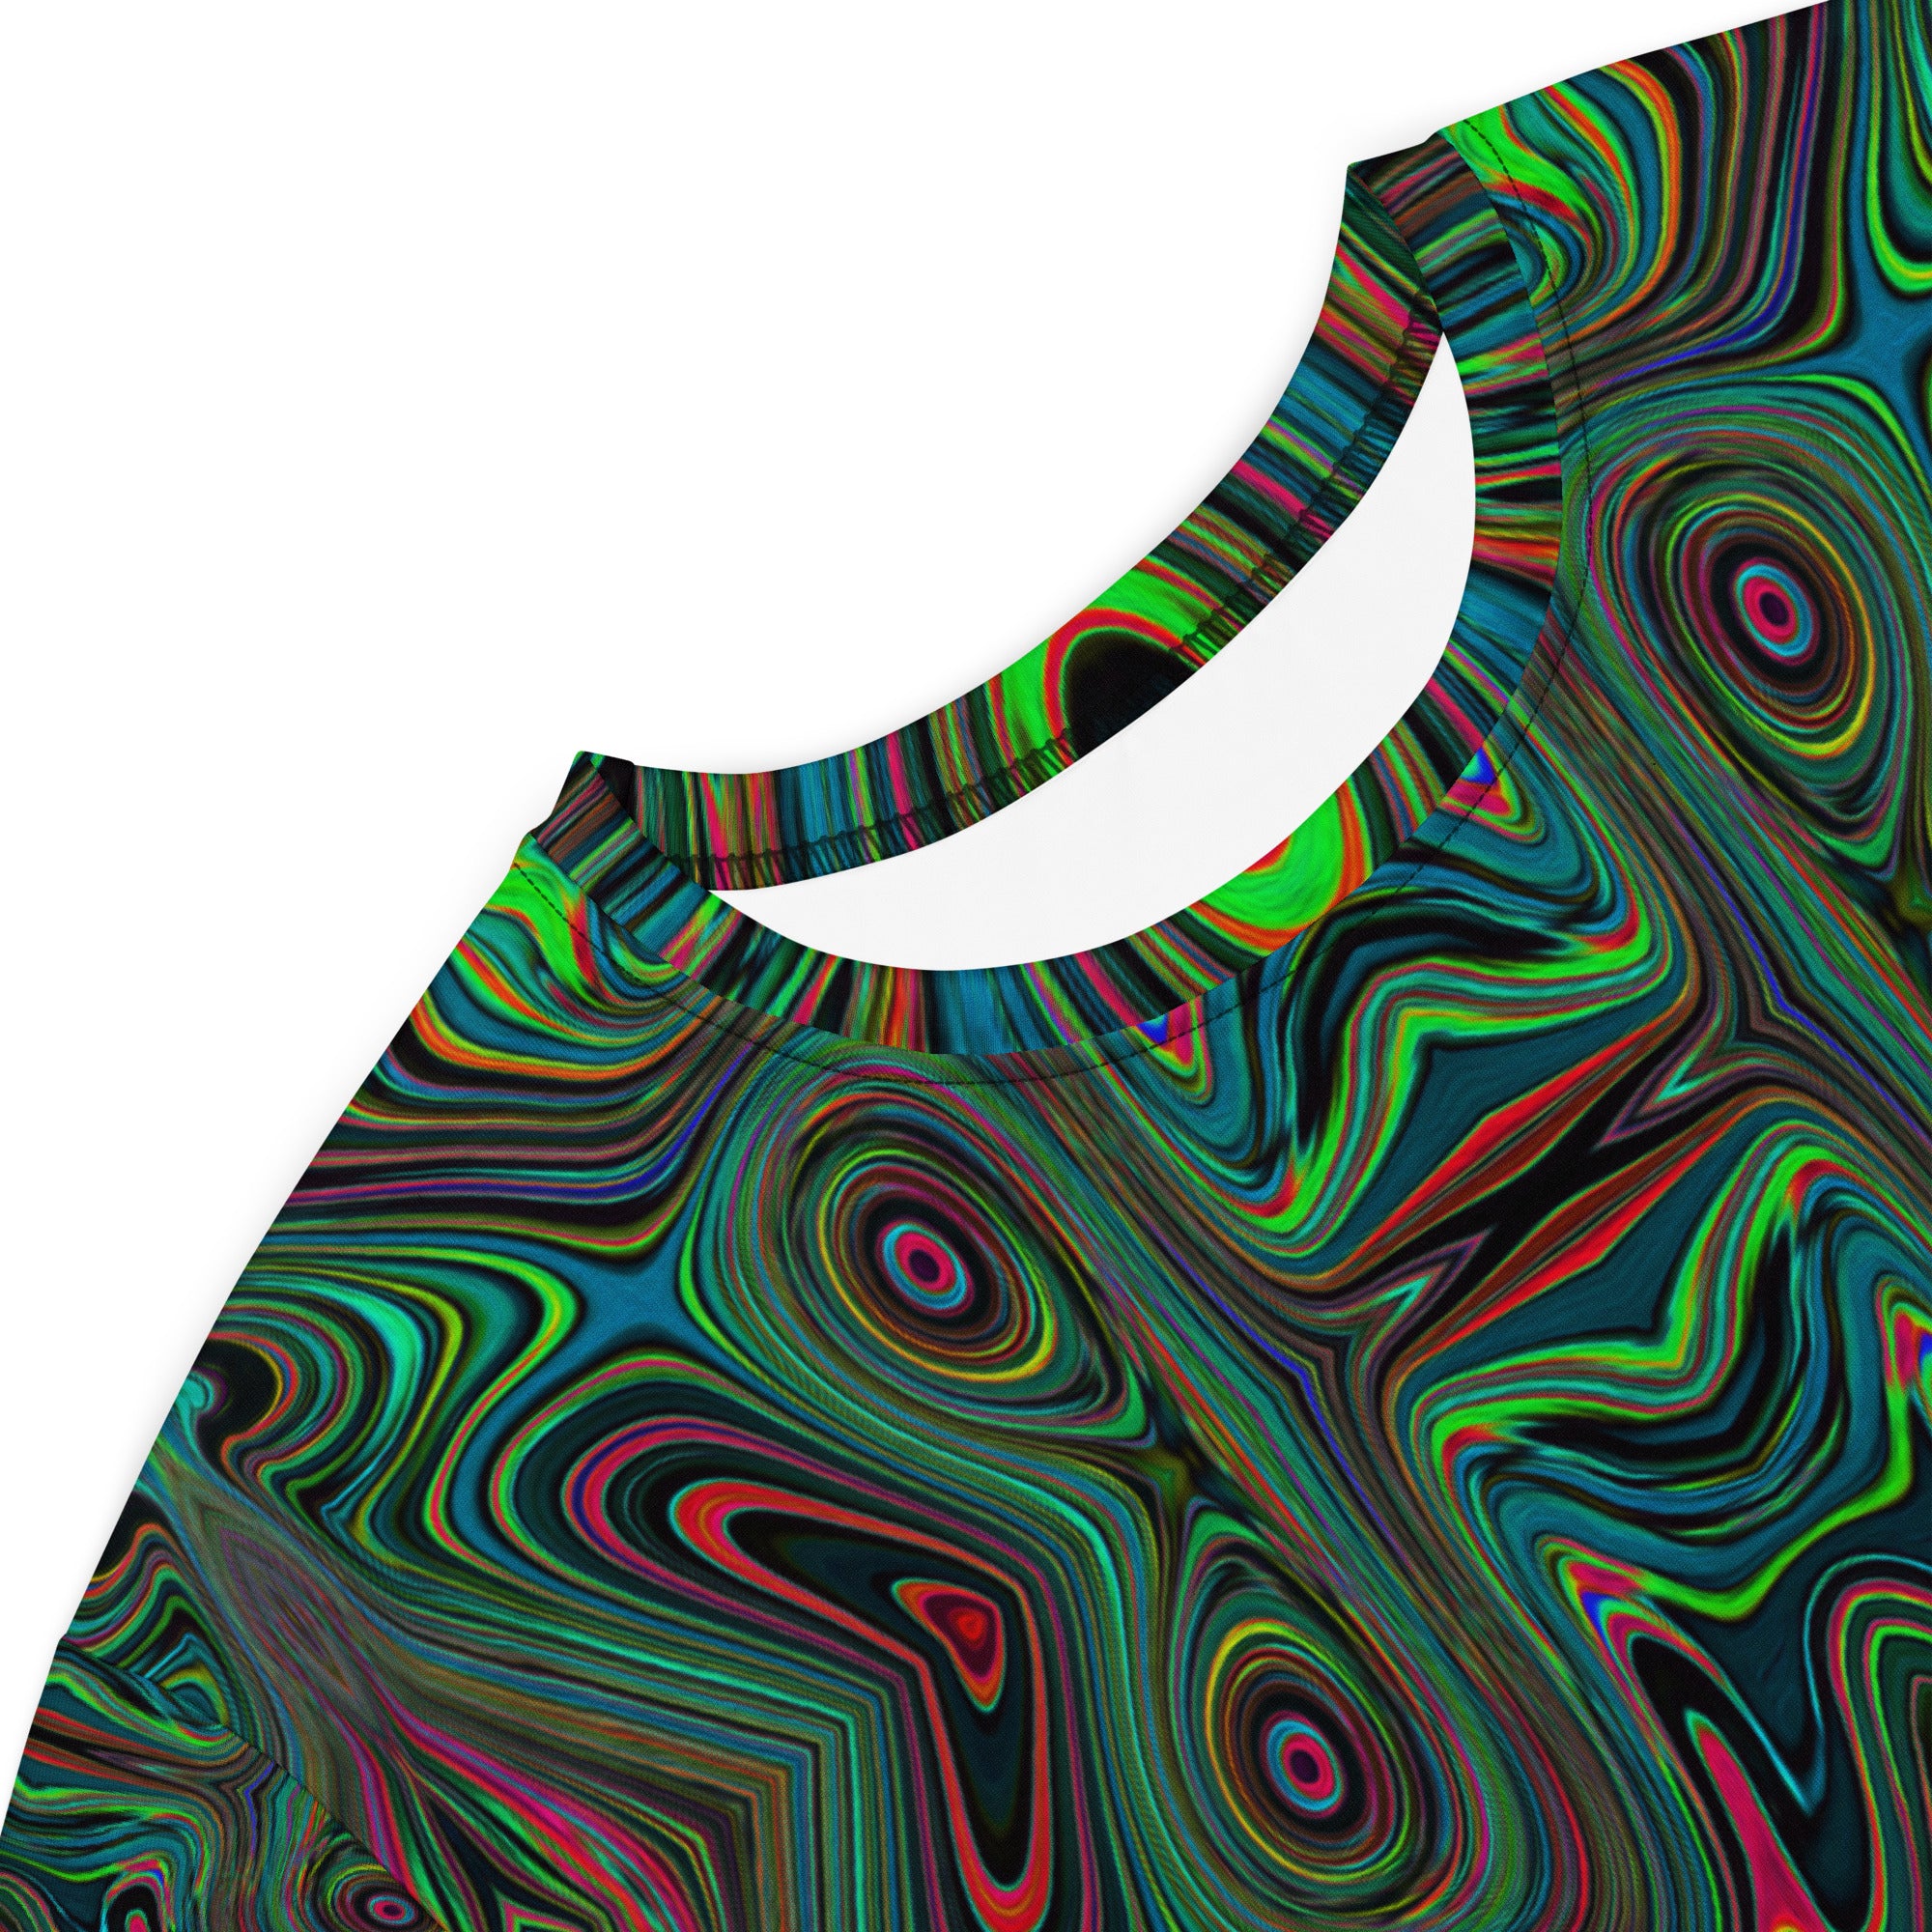 T Shirt Dress, Trippy Retro Black and Lime Green Abstract Pattern